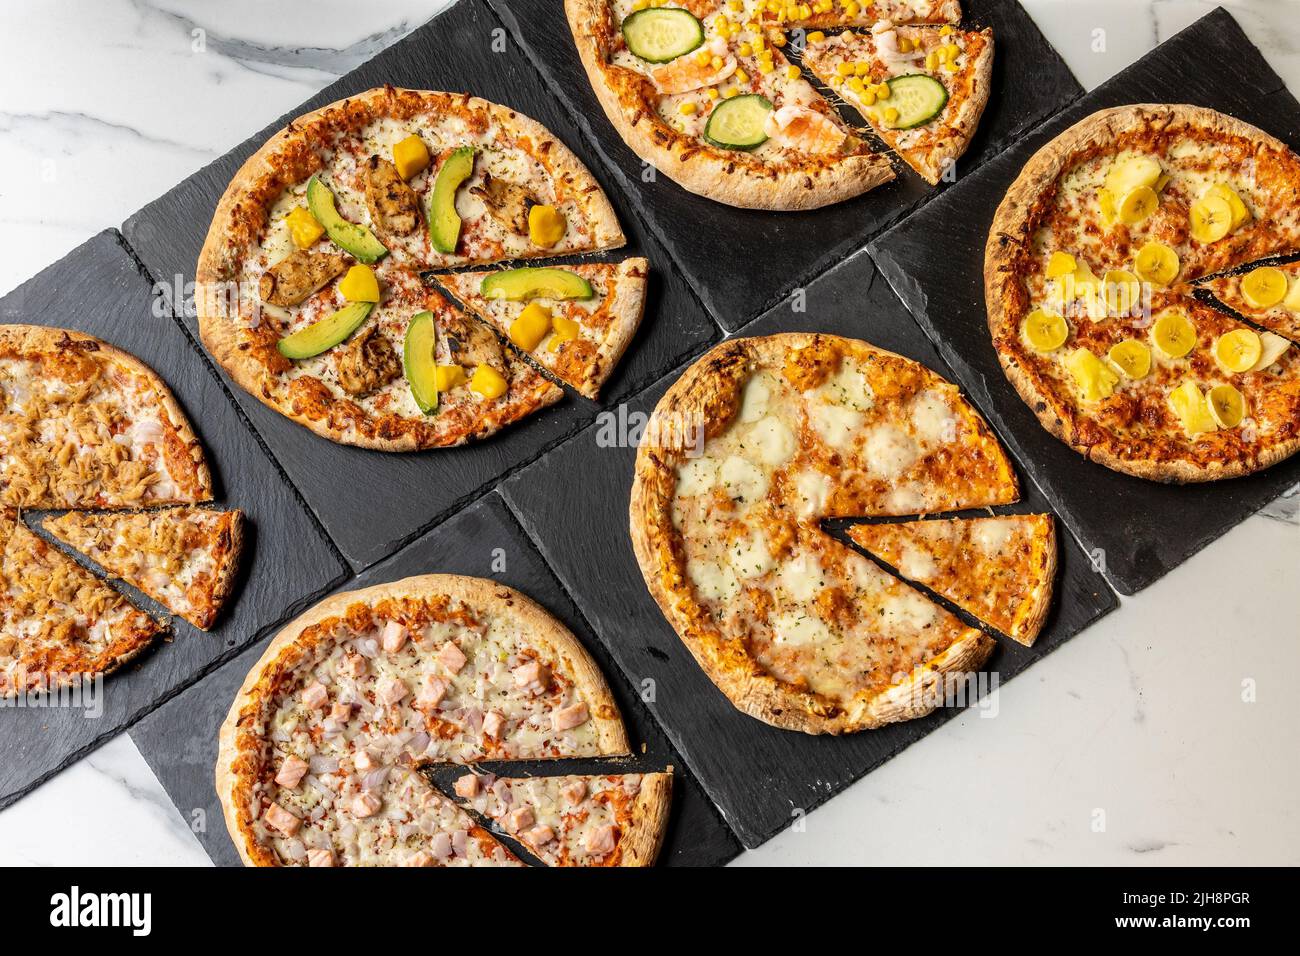 A set of different California-style nontraditional pizzas on black serving plates Stock Photo